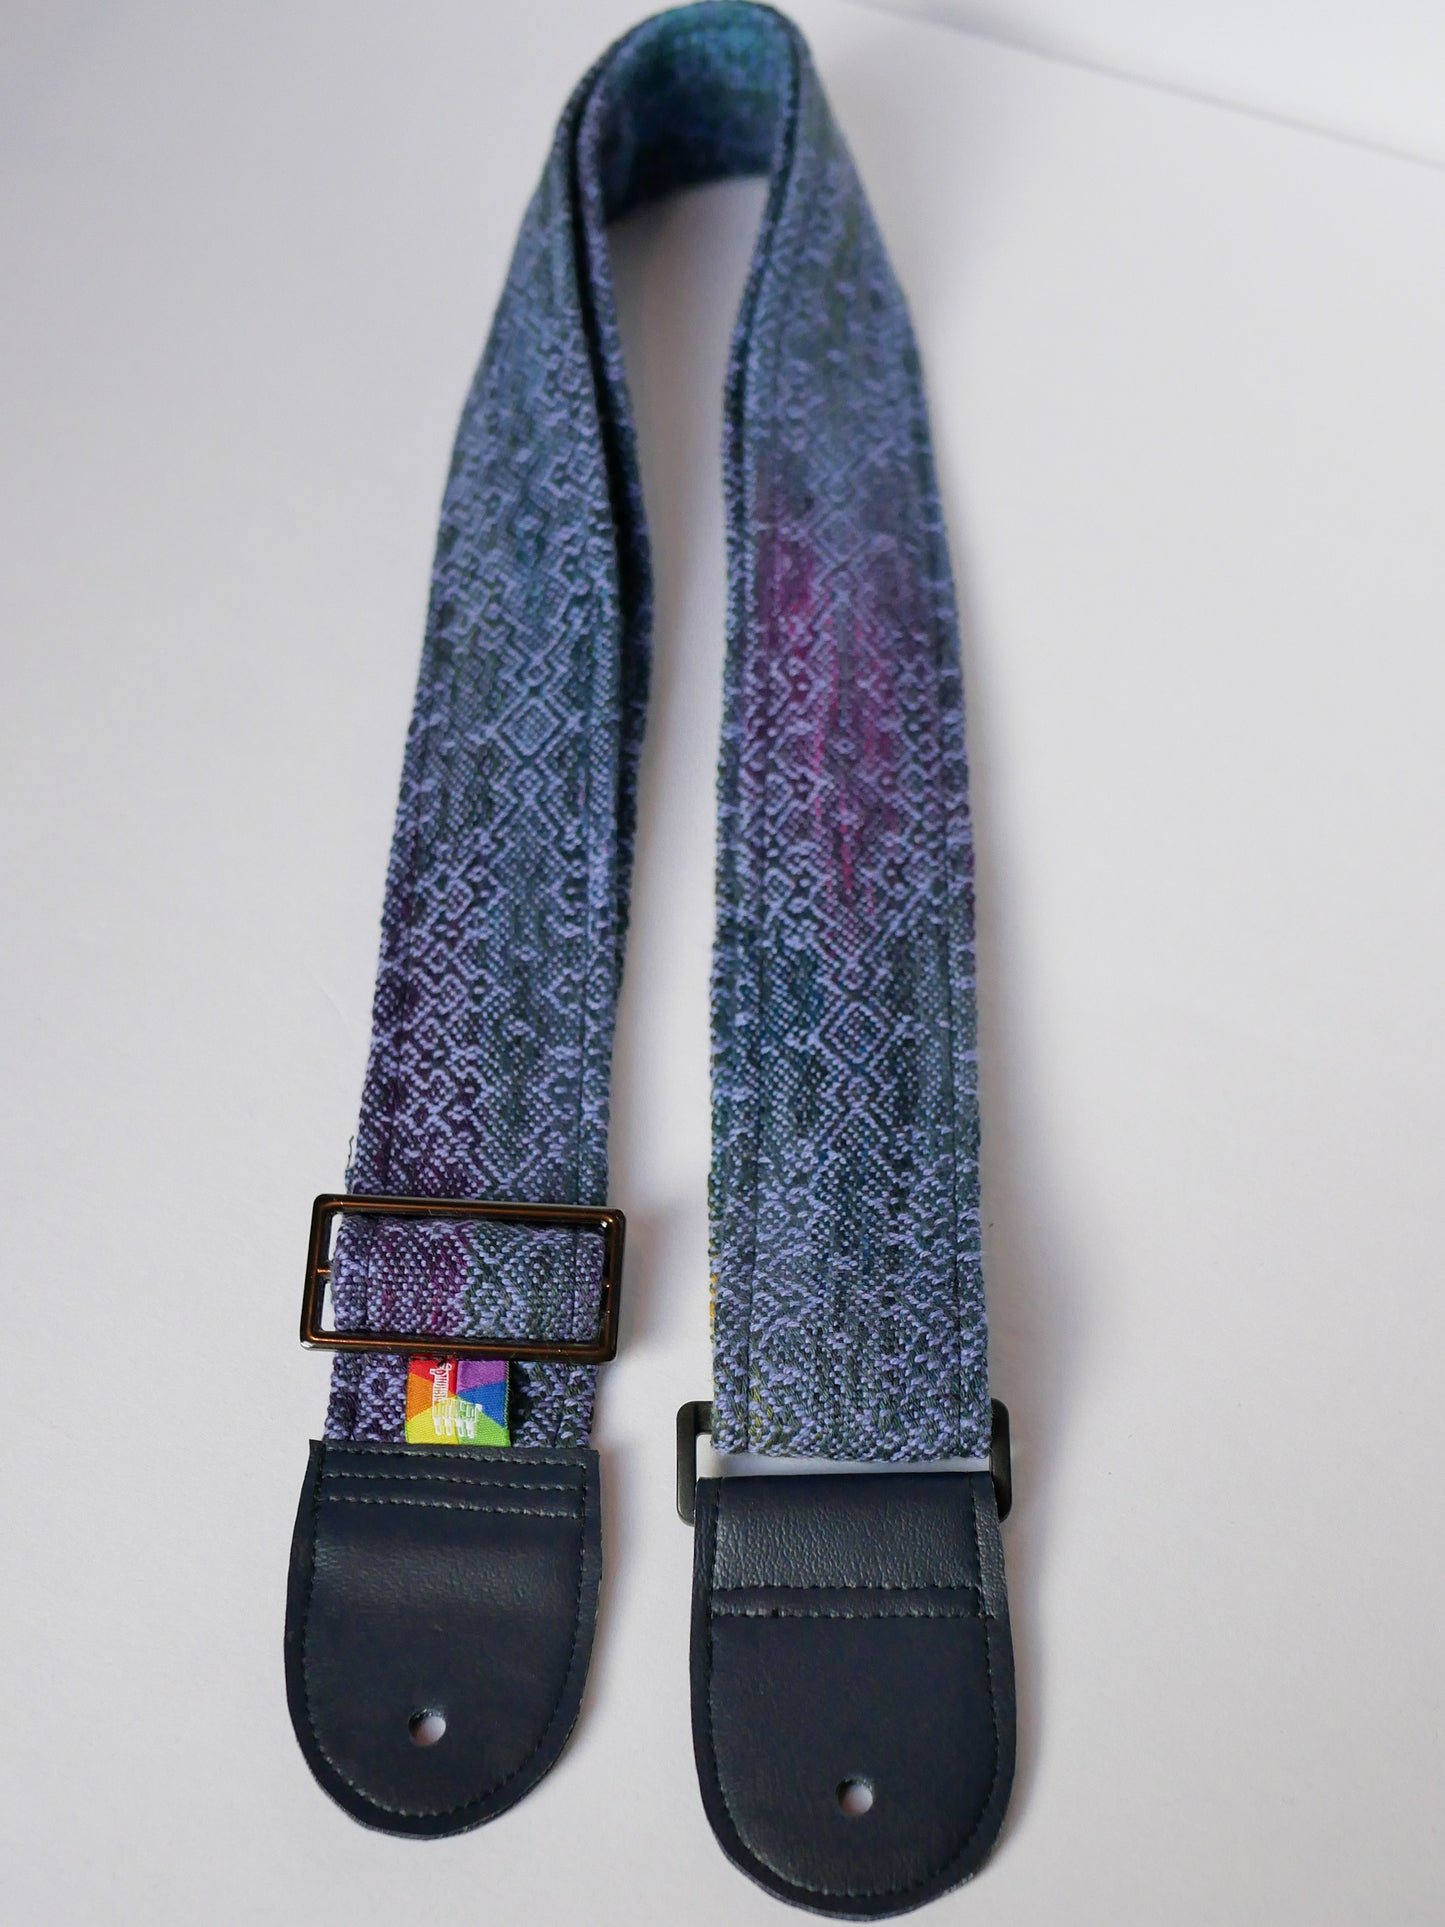 Handwoven Guitar Strap - Periwinkle Galaxy